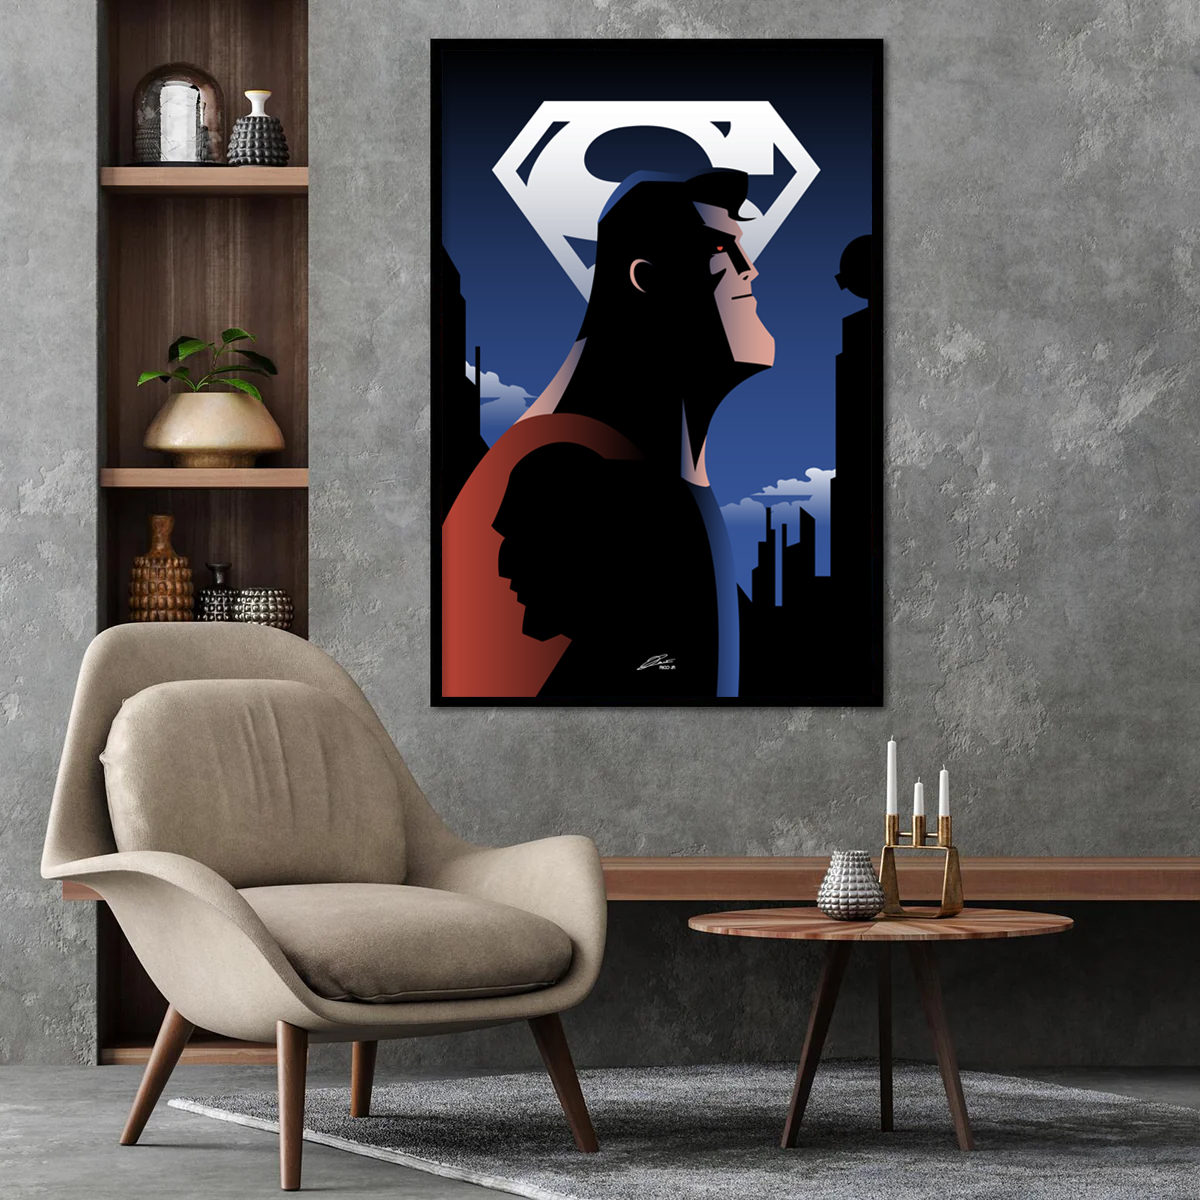 Buy SUPERMAN Animated Series Poster @ $15.60